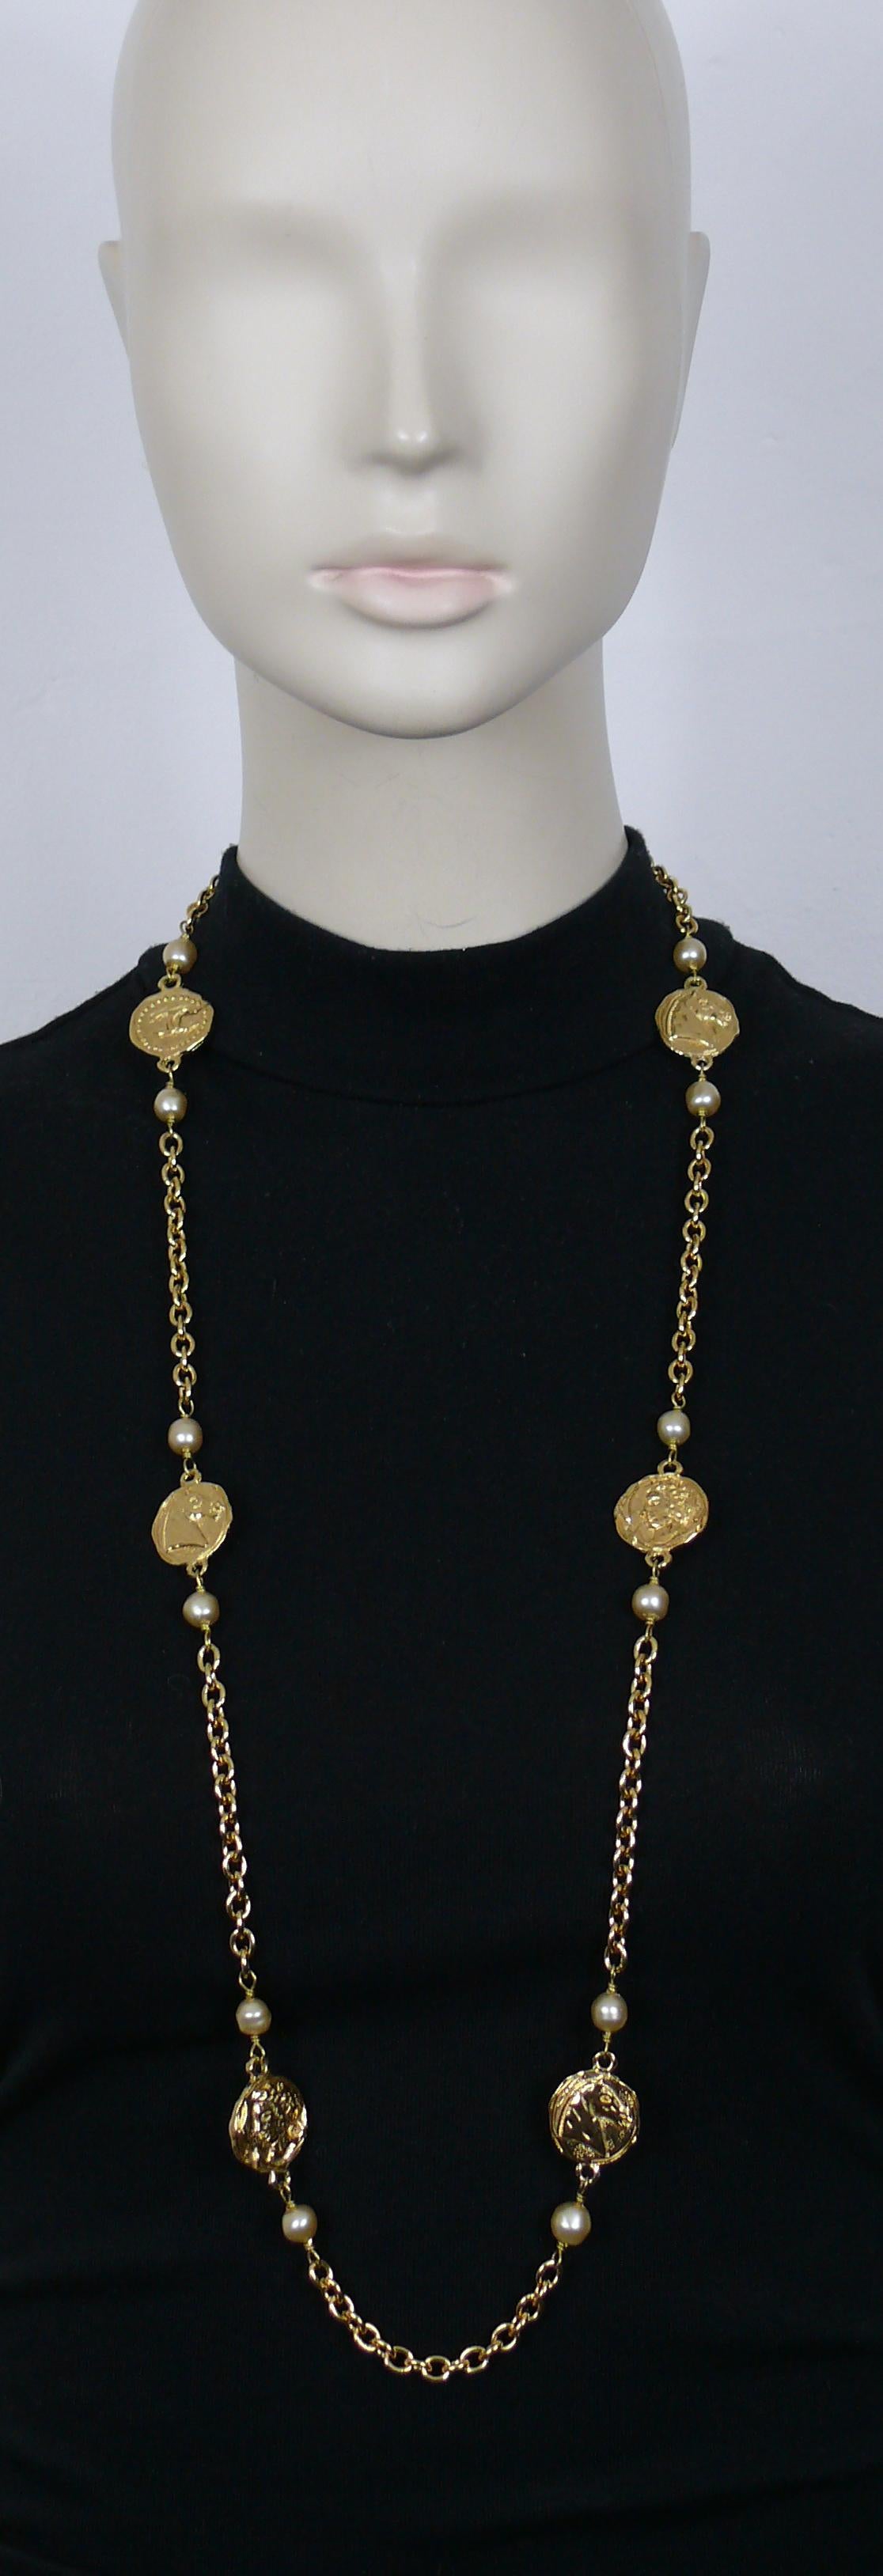 CHANEL vintage gold tone chain necklace featuring antique like coins and faux pearls.

Spring clasp closure.

Embossed CHANEL Made in France.

Indicative measurements : length approx. 95 cm (37.40 inches) / width of the coins approx. 2.2 cm (0.87